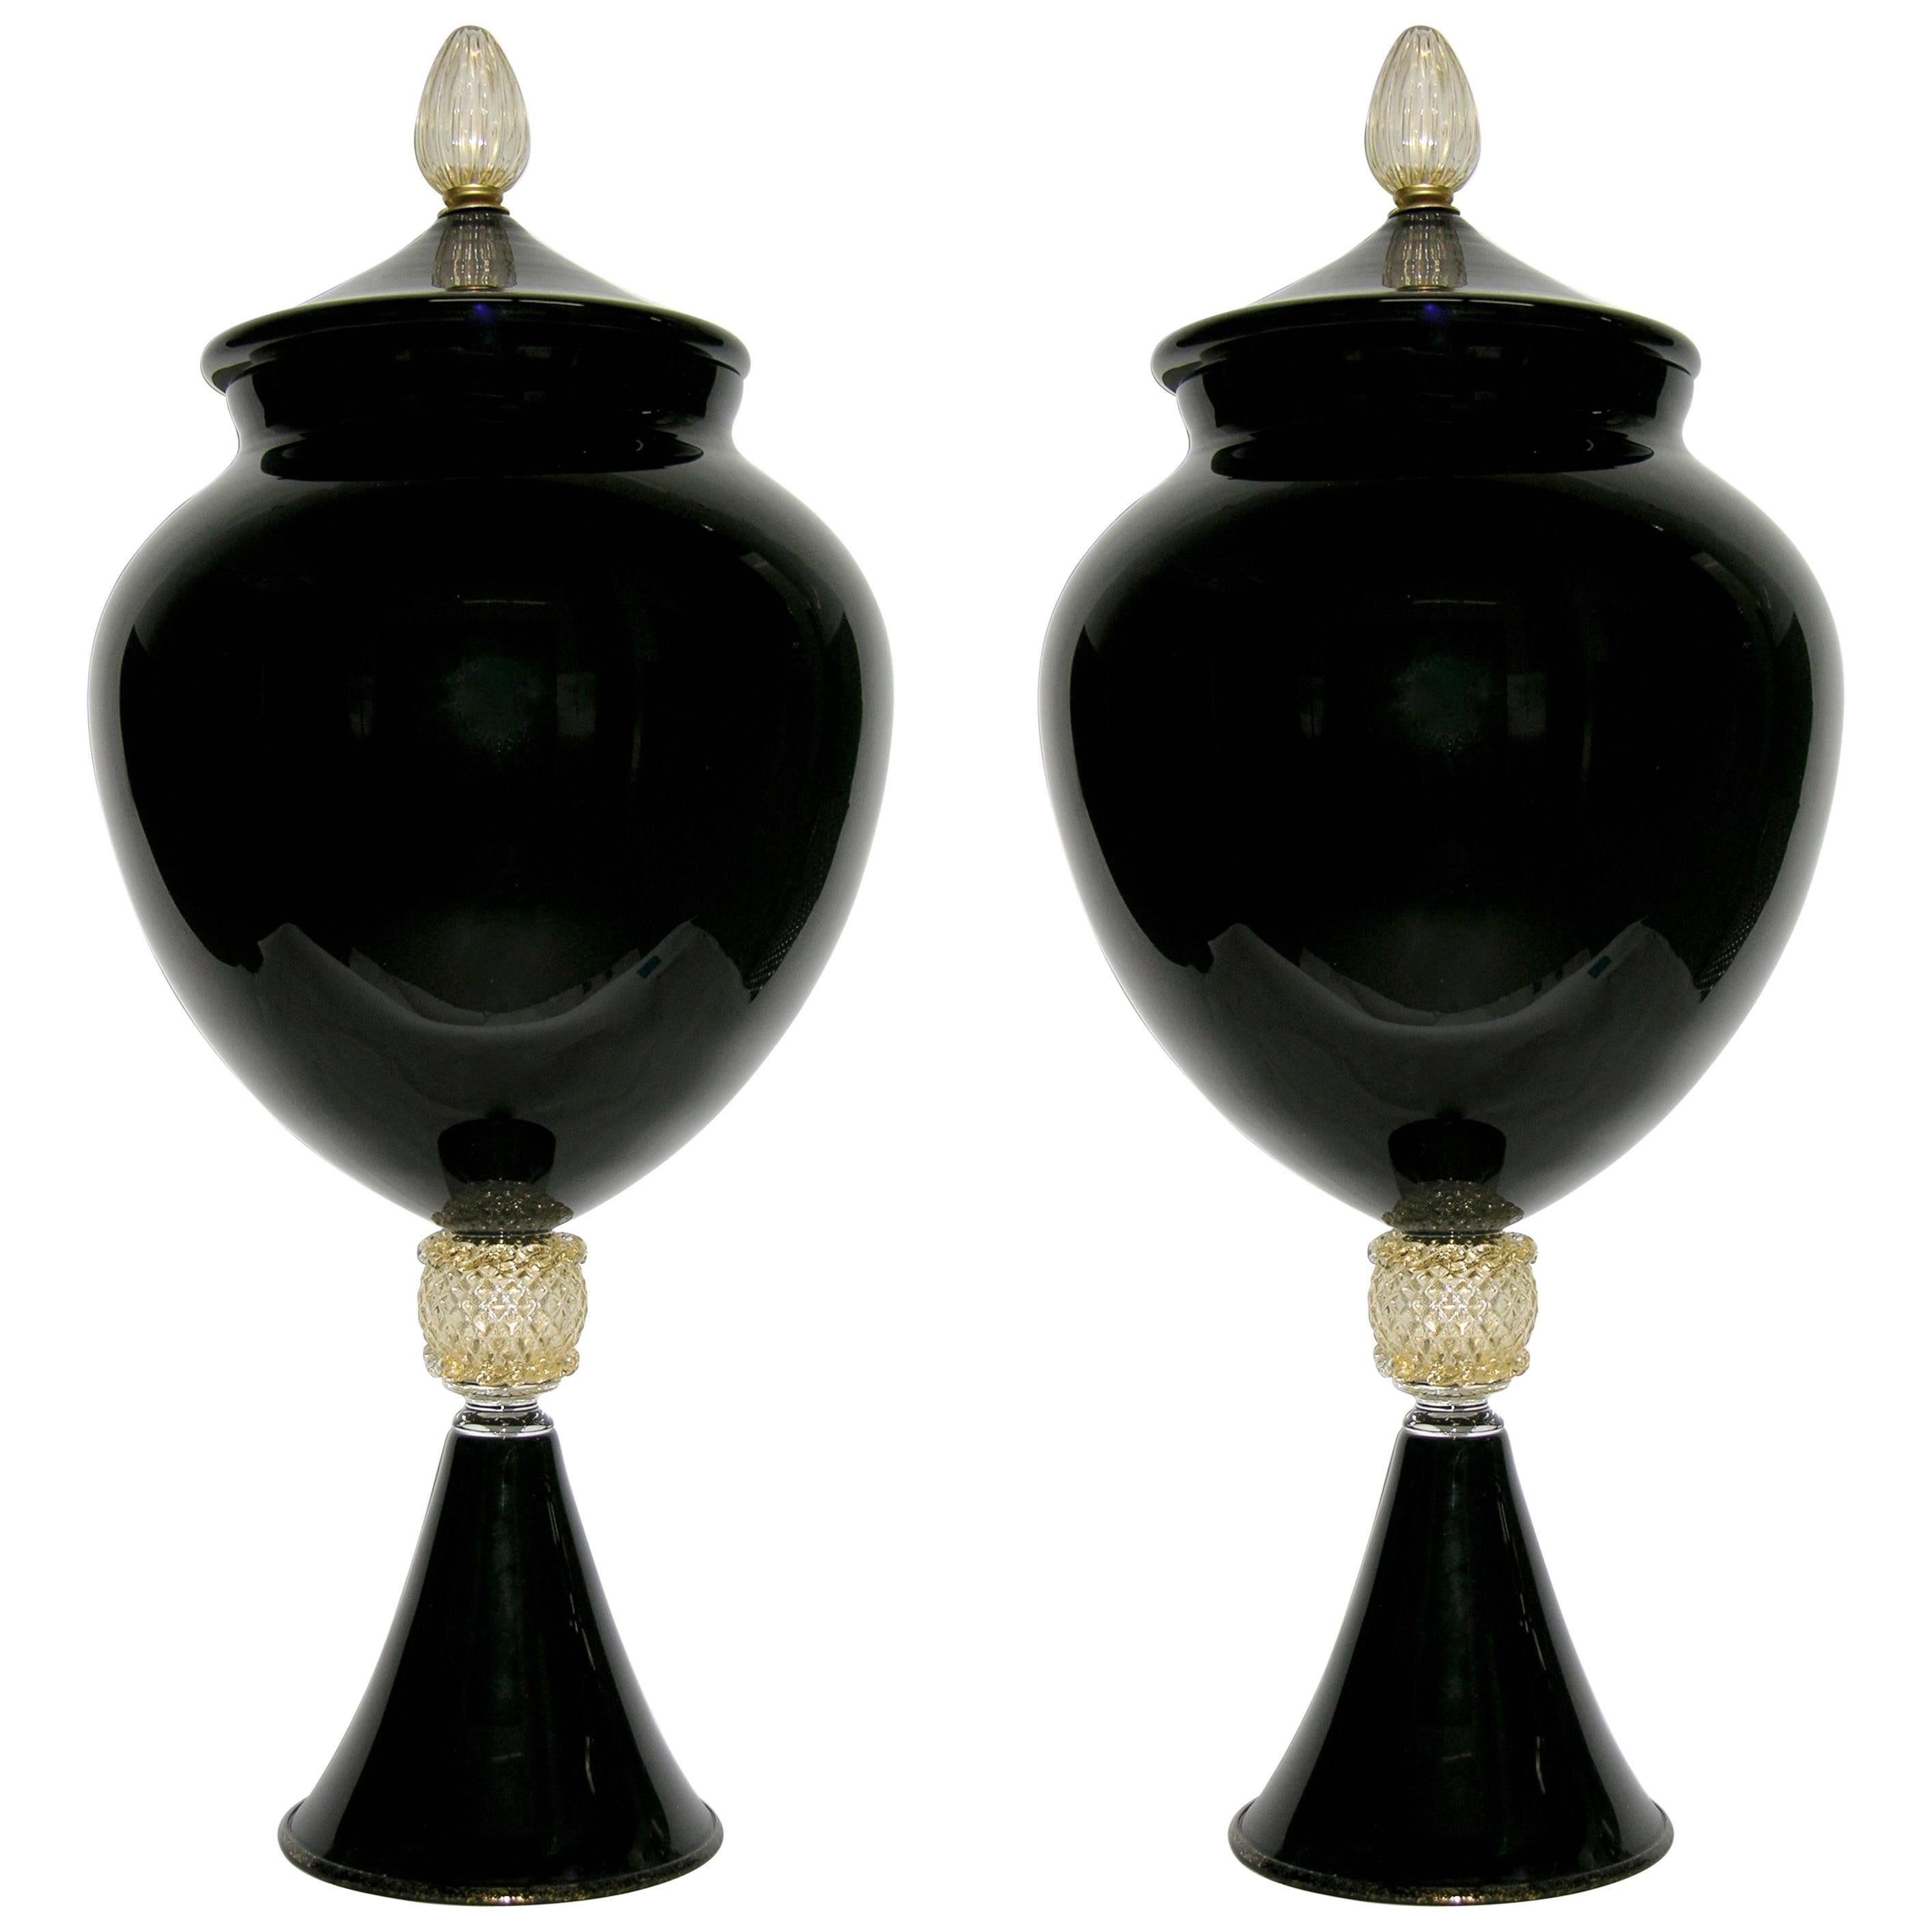 1980 Italian Pair of Tall Black and Gold Glass Vases / Urns Attributed to Venini